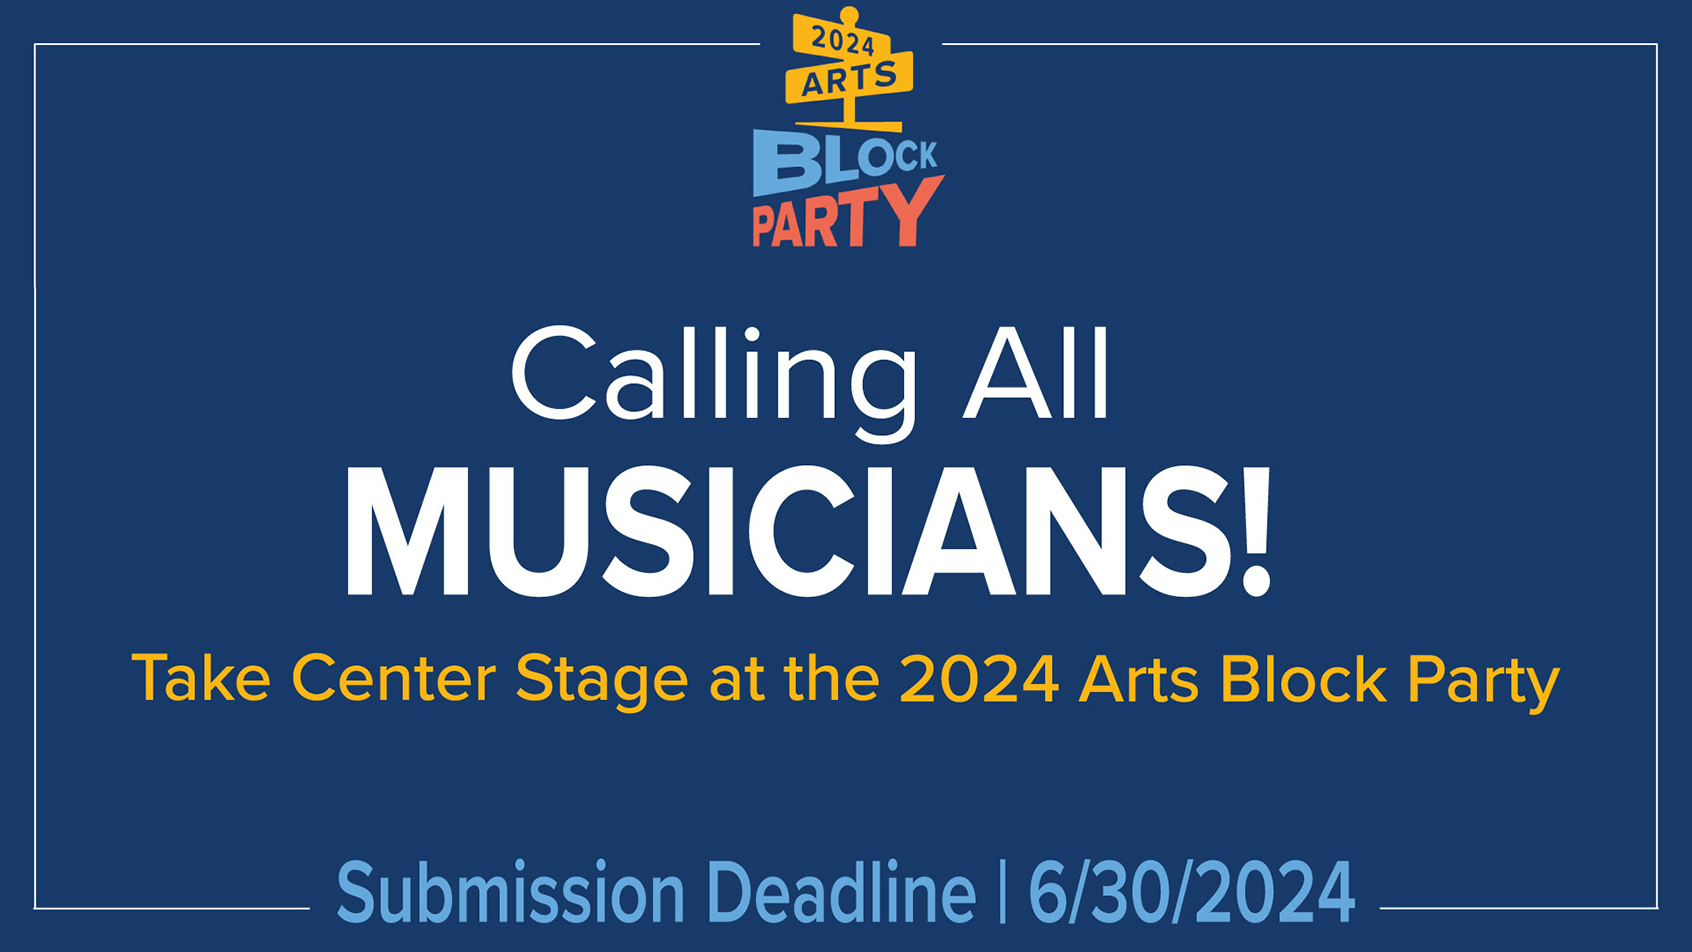 Calling all musicians! Take center stage at the 2024 Arts Block Party. Submission deadline June 30, 2024.